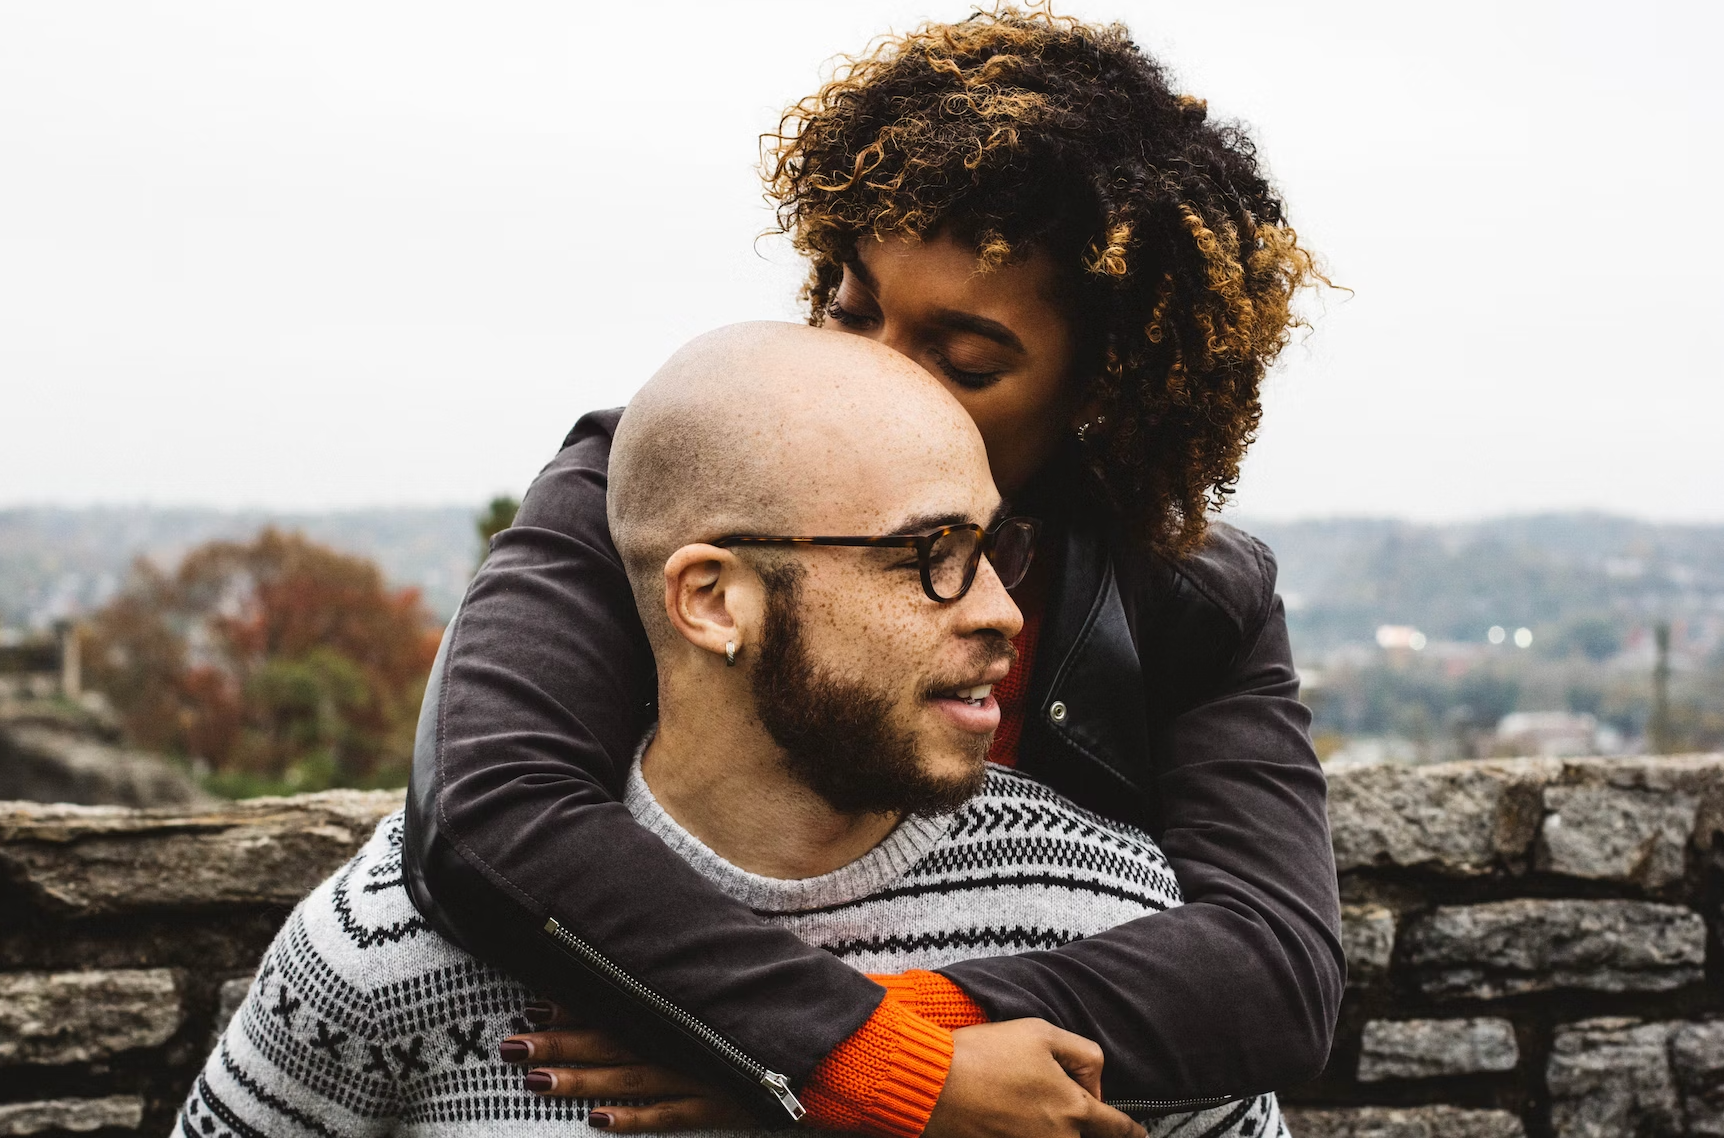 Developing a Healthy Relationship: 7 Tips for a Strong and Happy Partnership